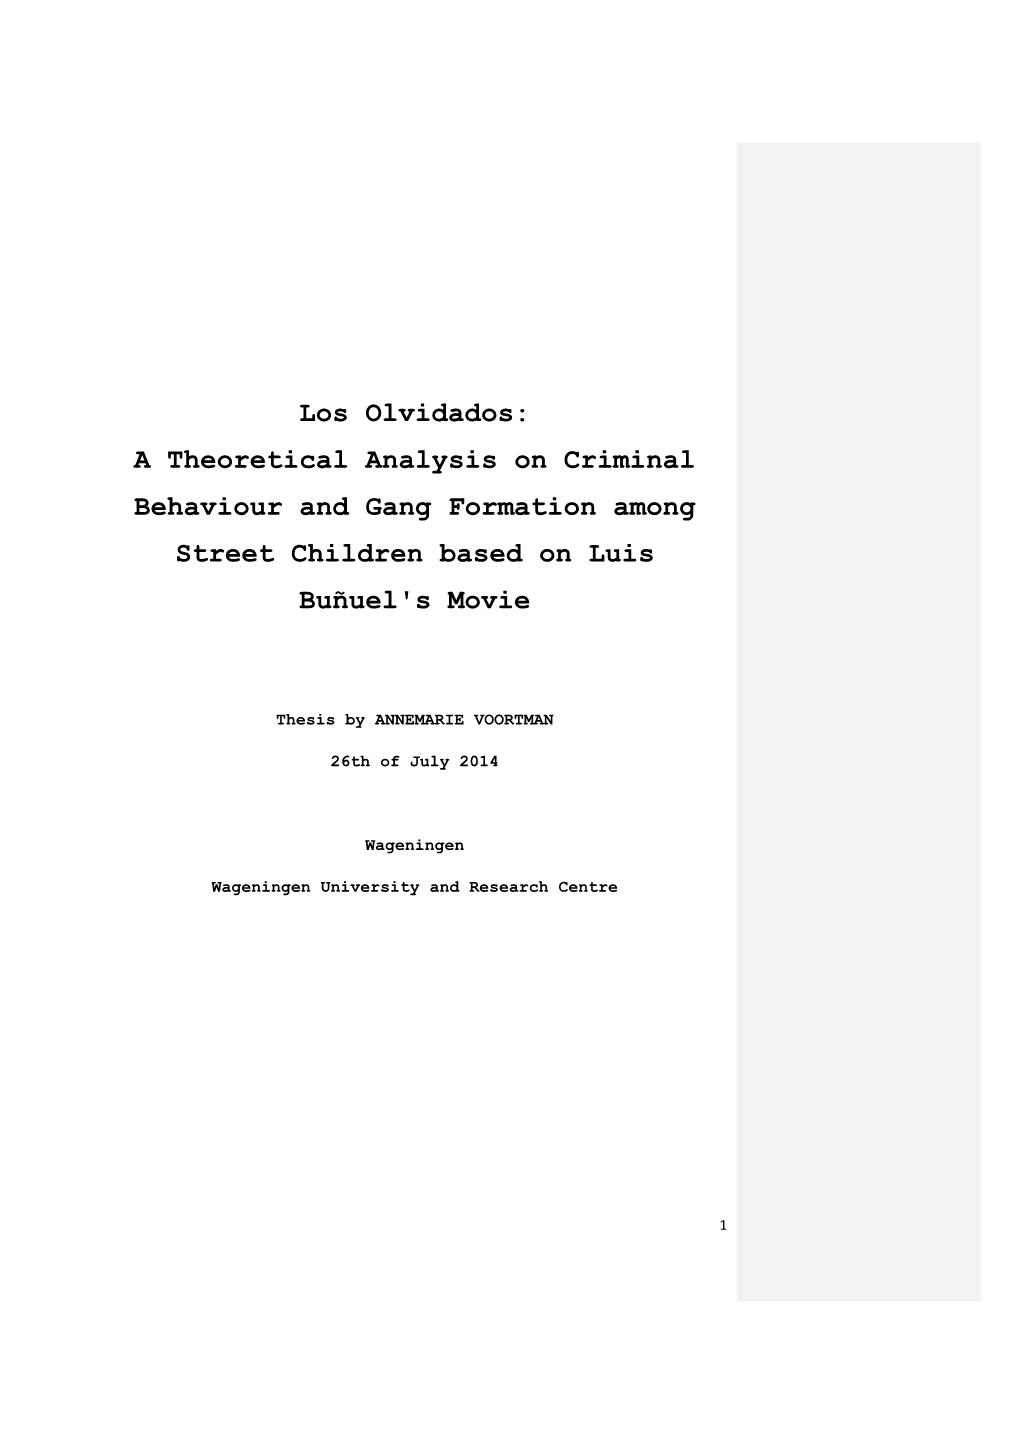 Los Olvidados: a Theoretical Analysis on Criminal Behaviour and Gang Formation Among Street Children Based on Luis Buñuel's Movie